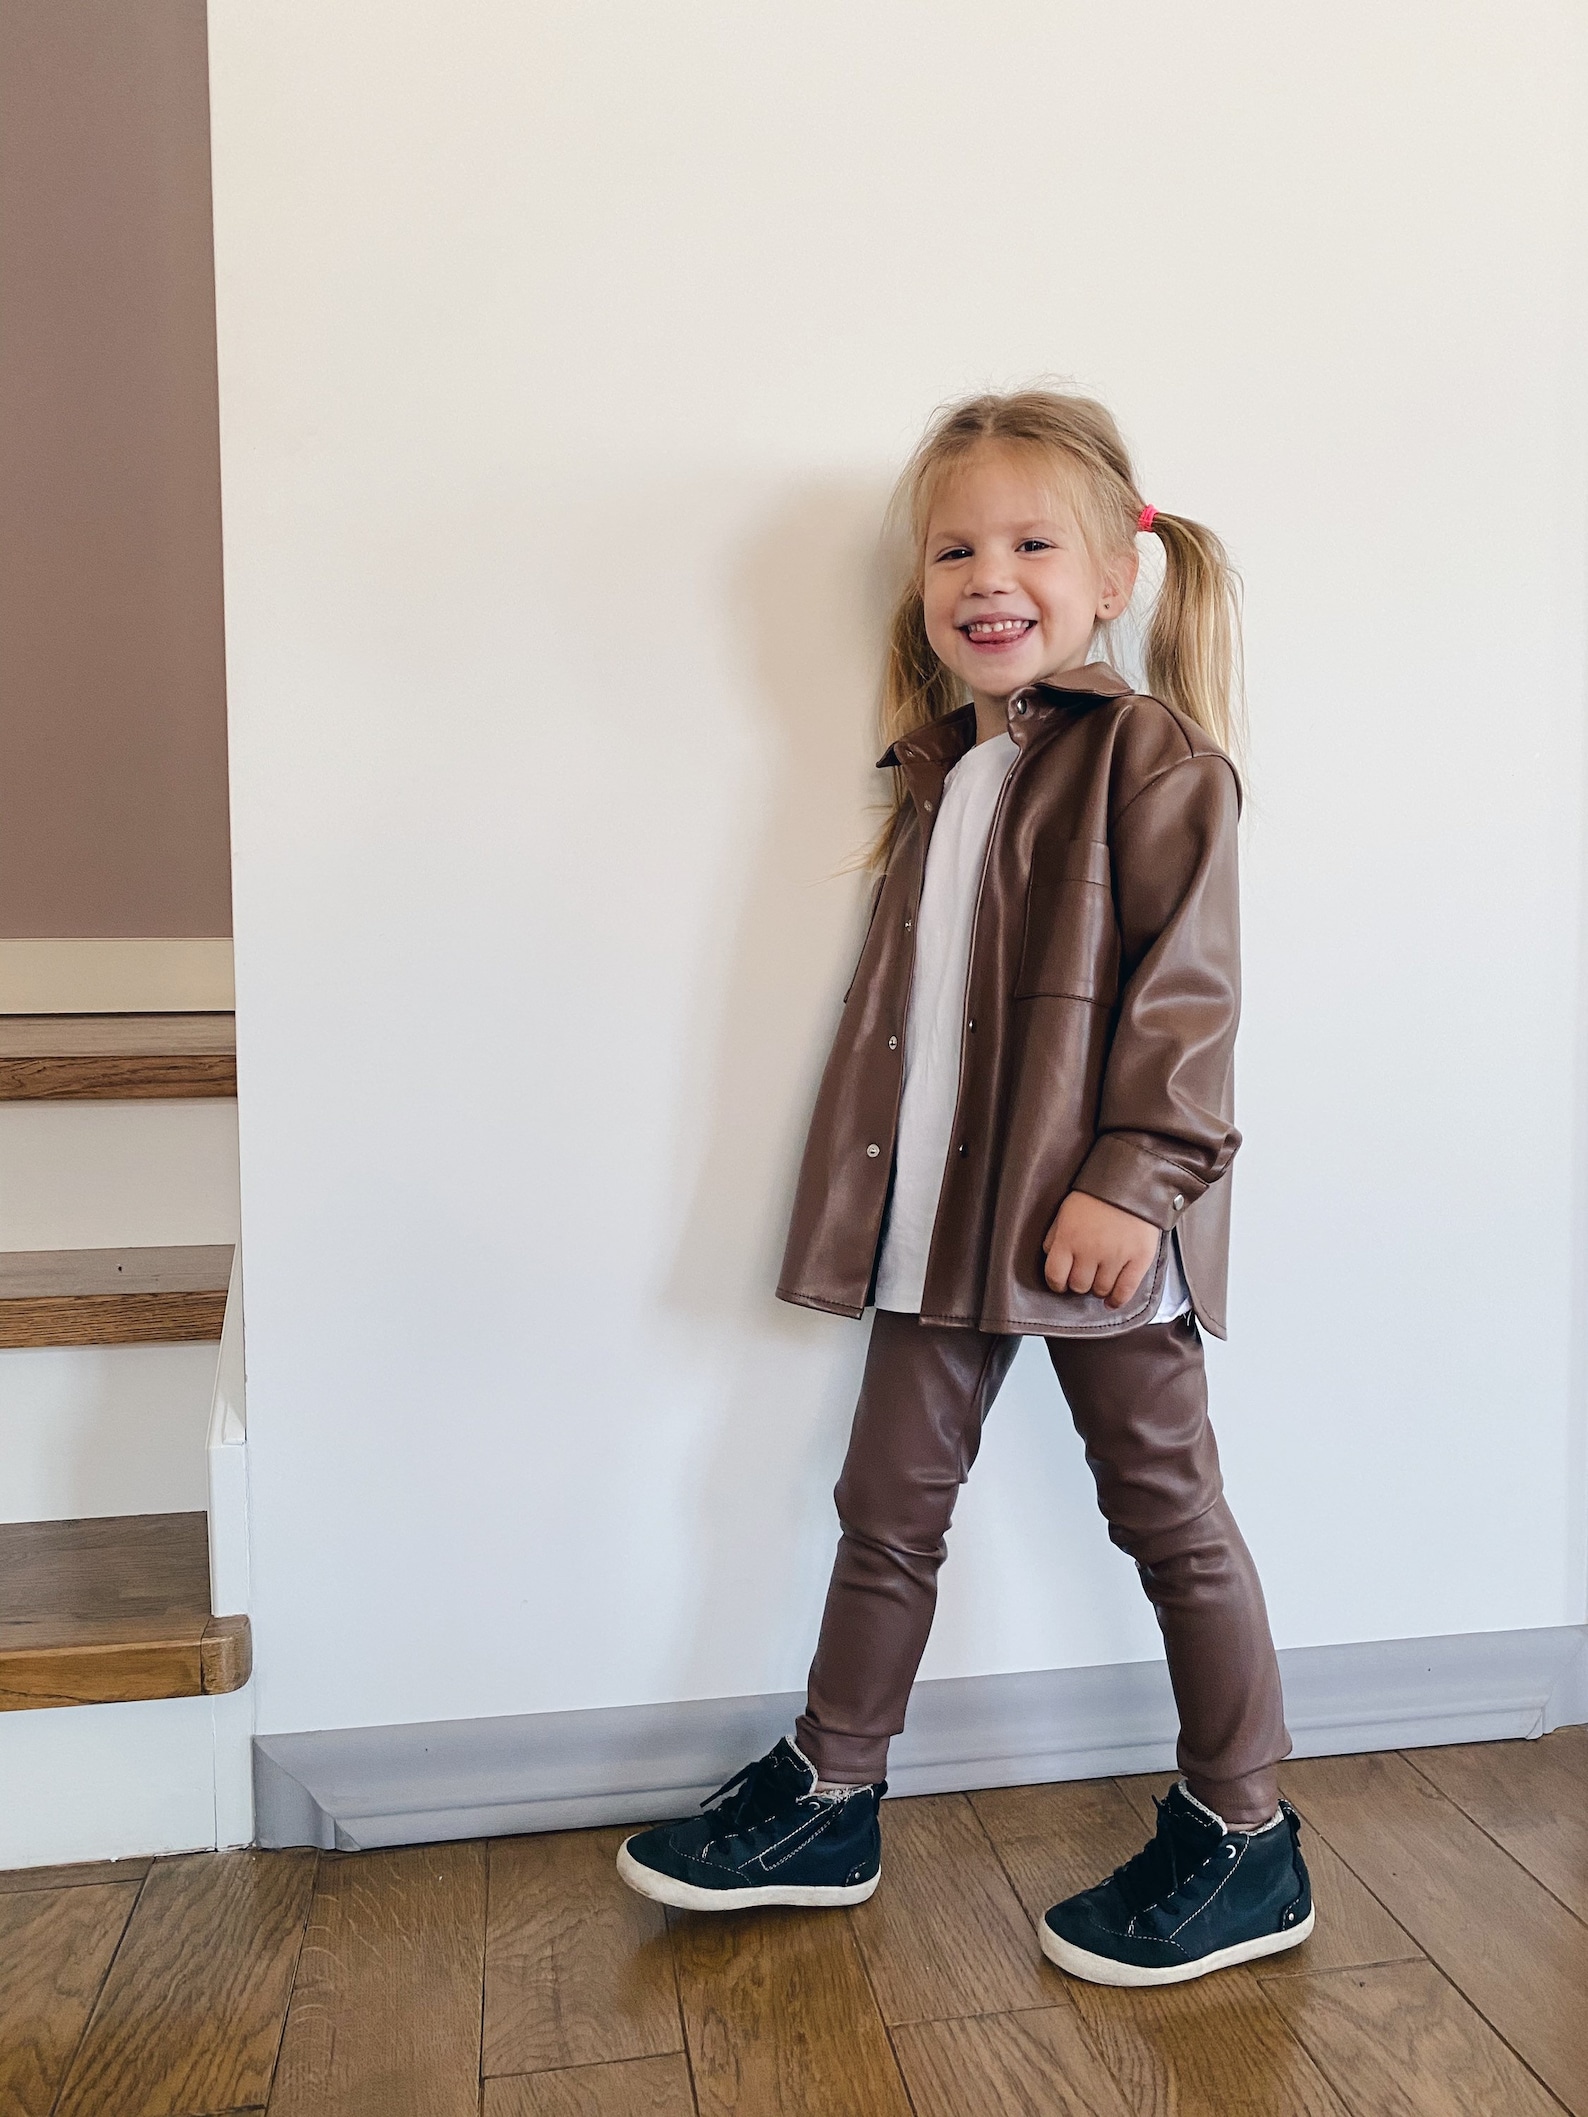 Chocolate Faux Leather Kids Leggings / Leather Pants / Street | Etsy